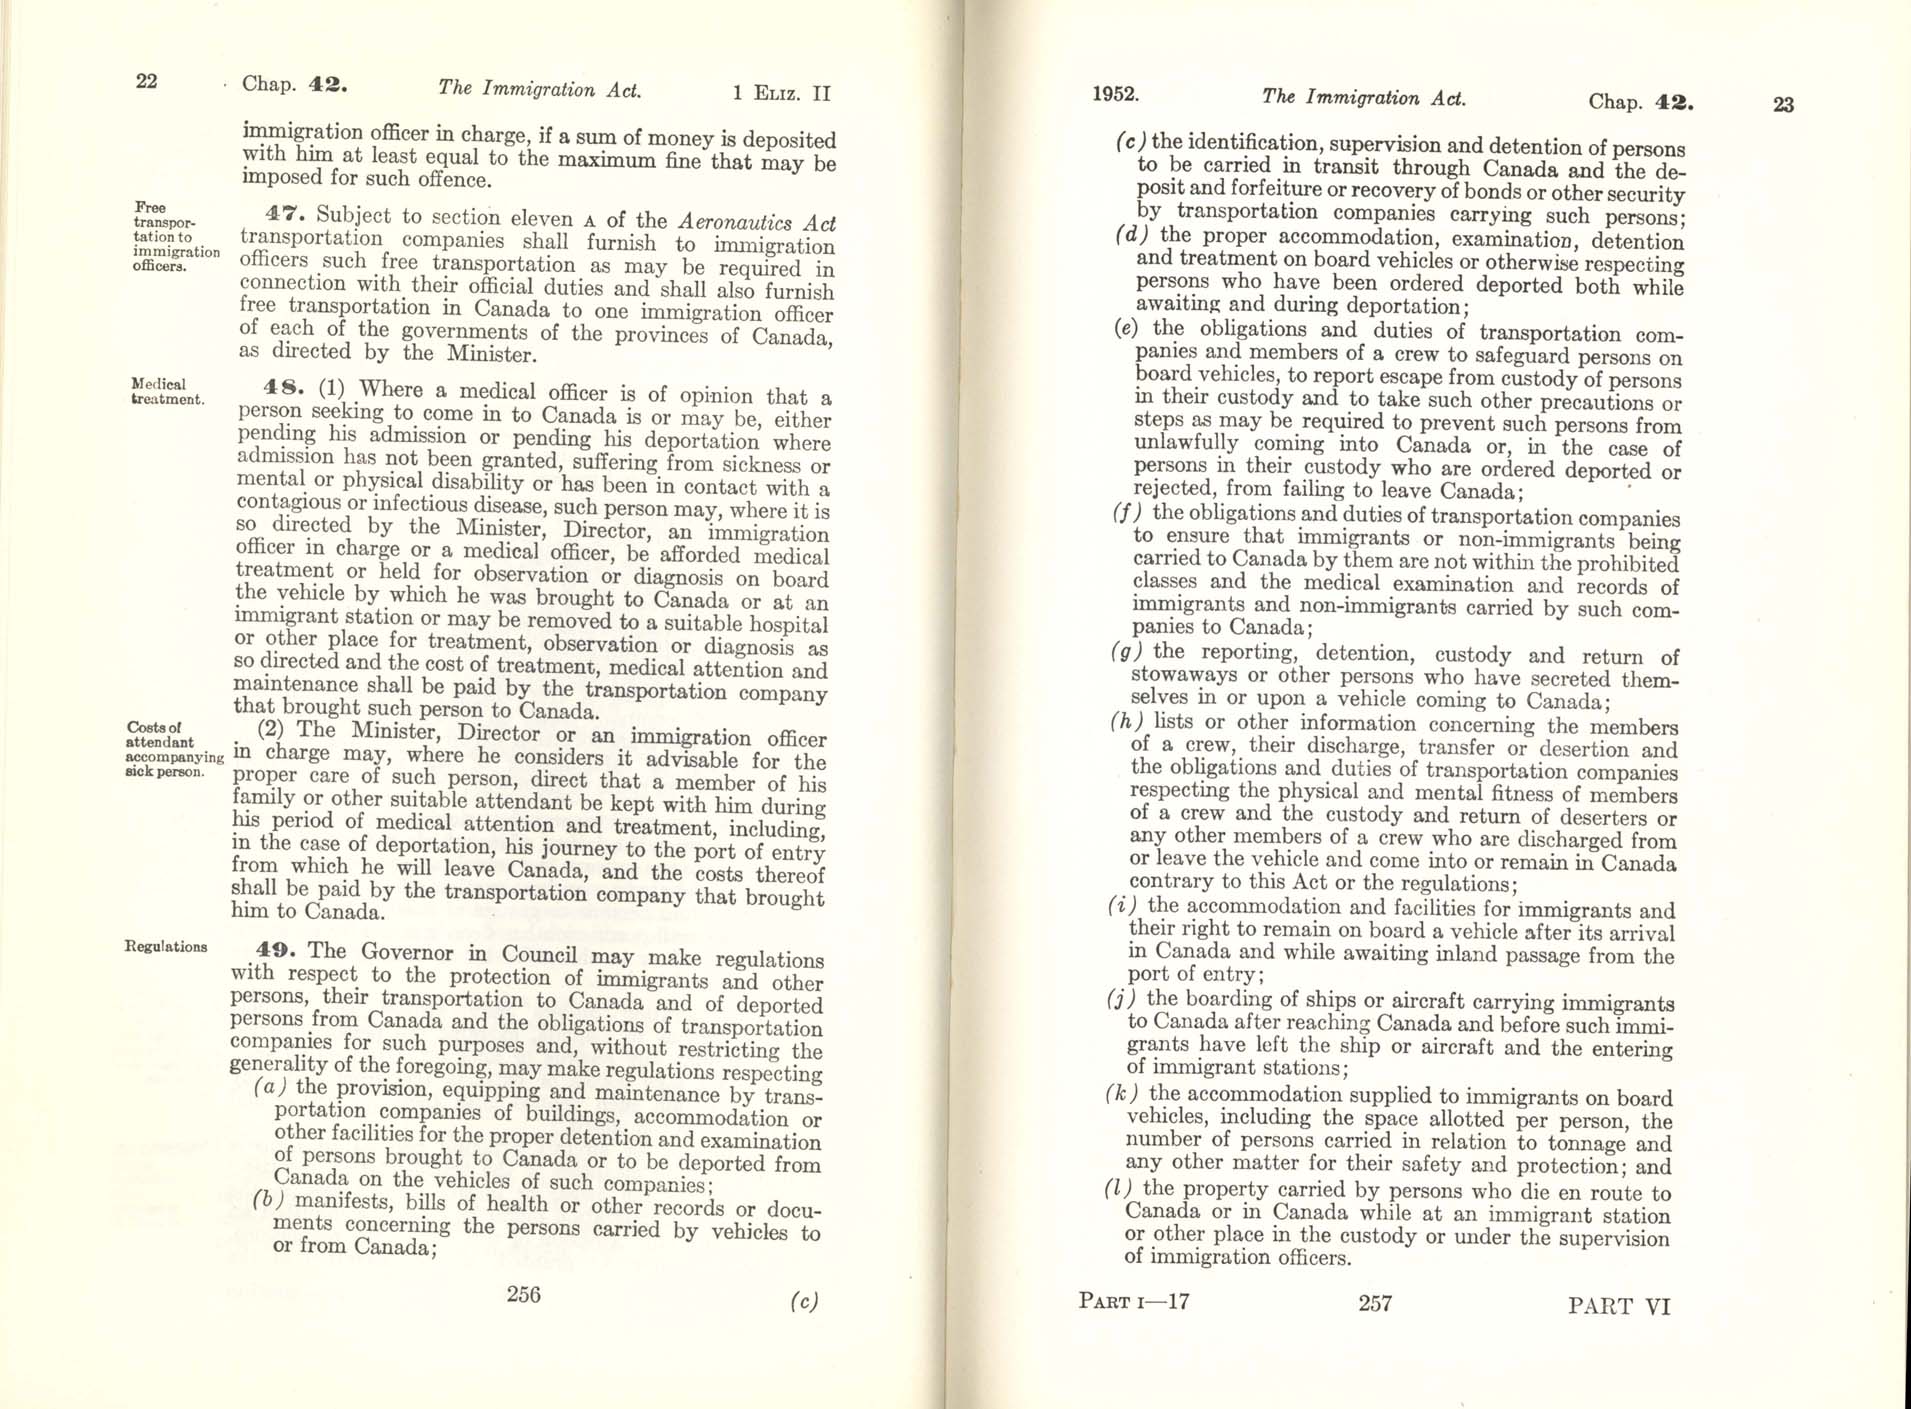 CHAP 42 Page 256, 257 Immigration Act, 1952